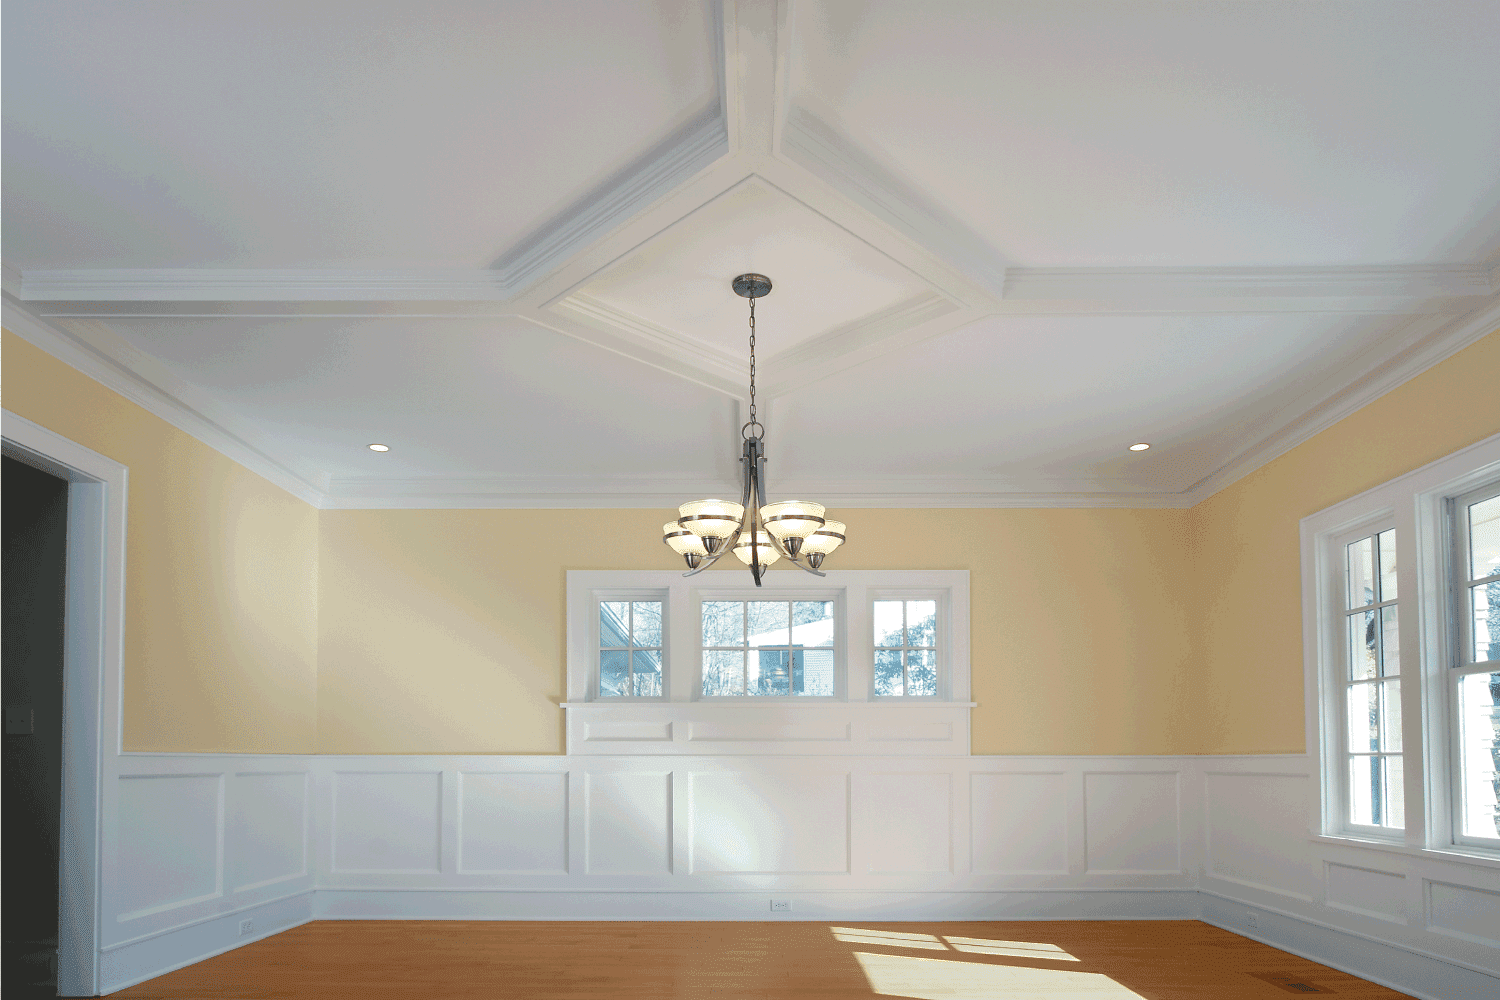 The dining room with chandelier in a newly built home.